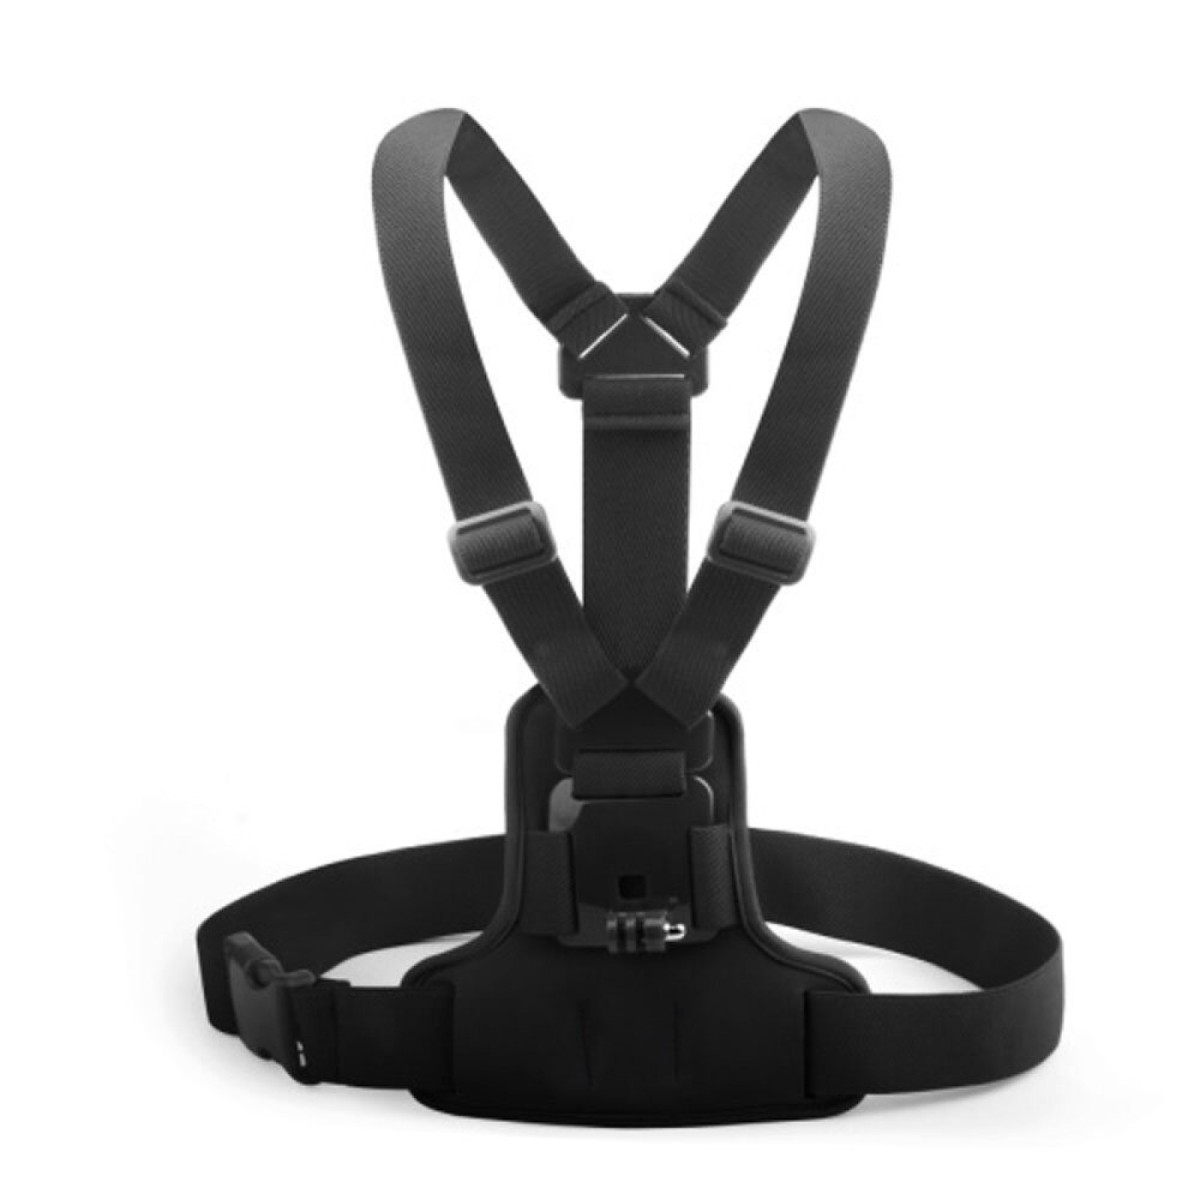 Chest Harness with Integrated Mount - Dartmoor Photographic Ltd.